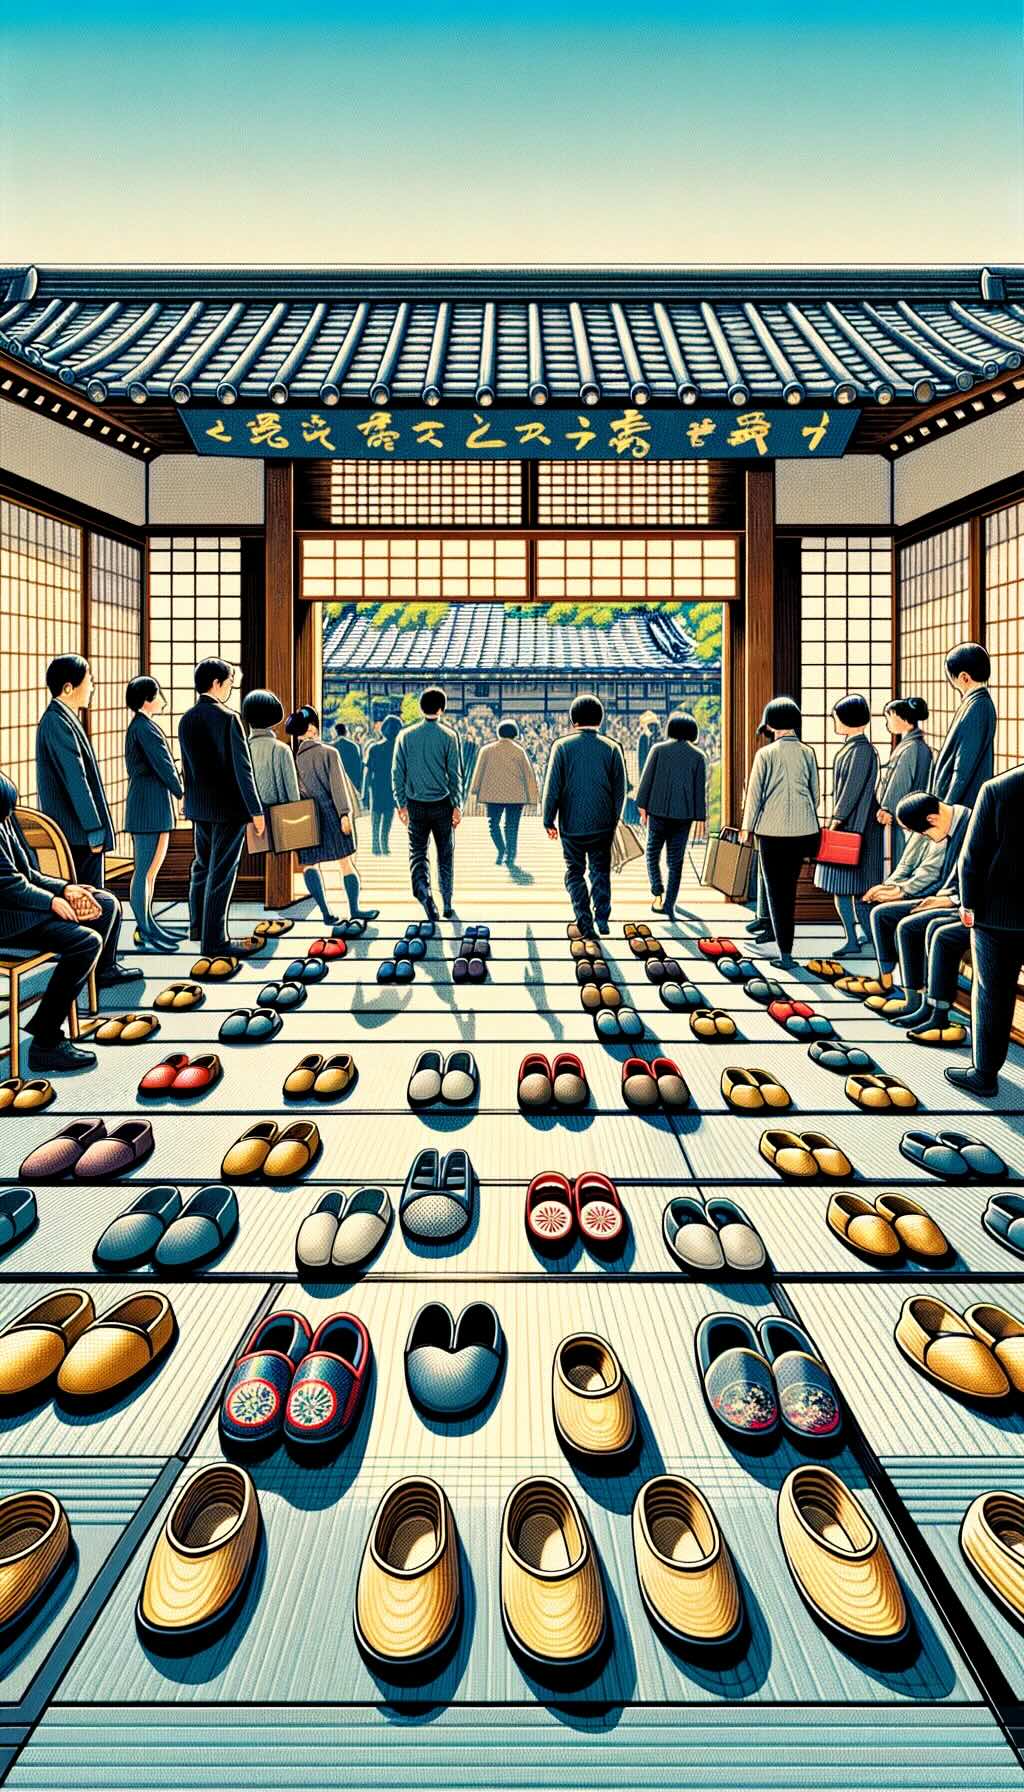 Custom of removing shoes in indoor spaces in Japan. It features a genkan (entryway area) with rows of slippers and a raised floor, highlighting the transition from outdoor to indoor environments. It depicts visitors observing this custom, removing their shoes, and wearing indoor slippers, including separate slippers for the restroom. It conveys the importance of this custom in Japanese culture, emphasizing values of cleanliness and purity and highlighting appropriate indoor footwear etiquette.